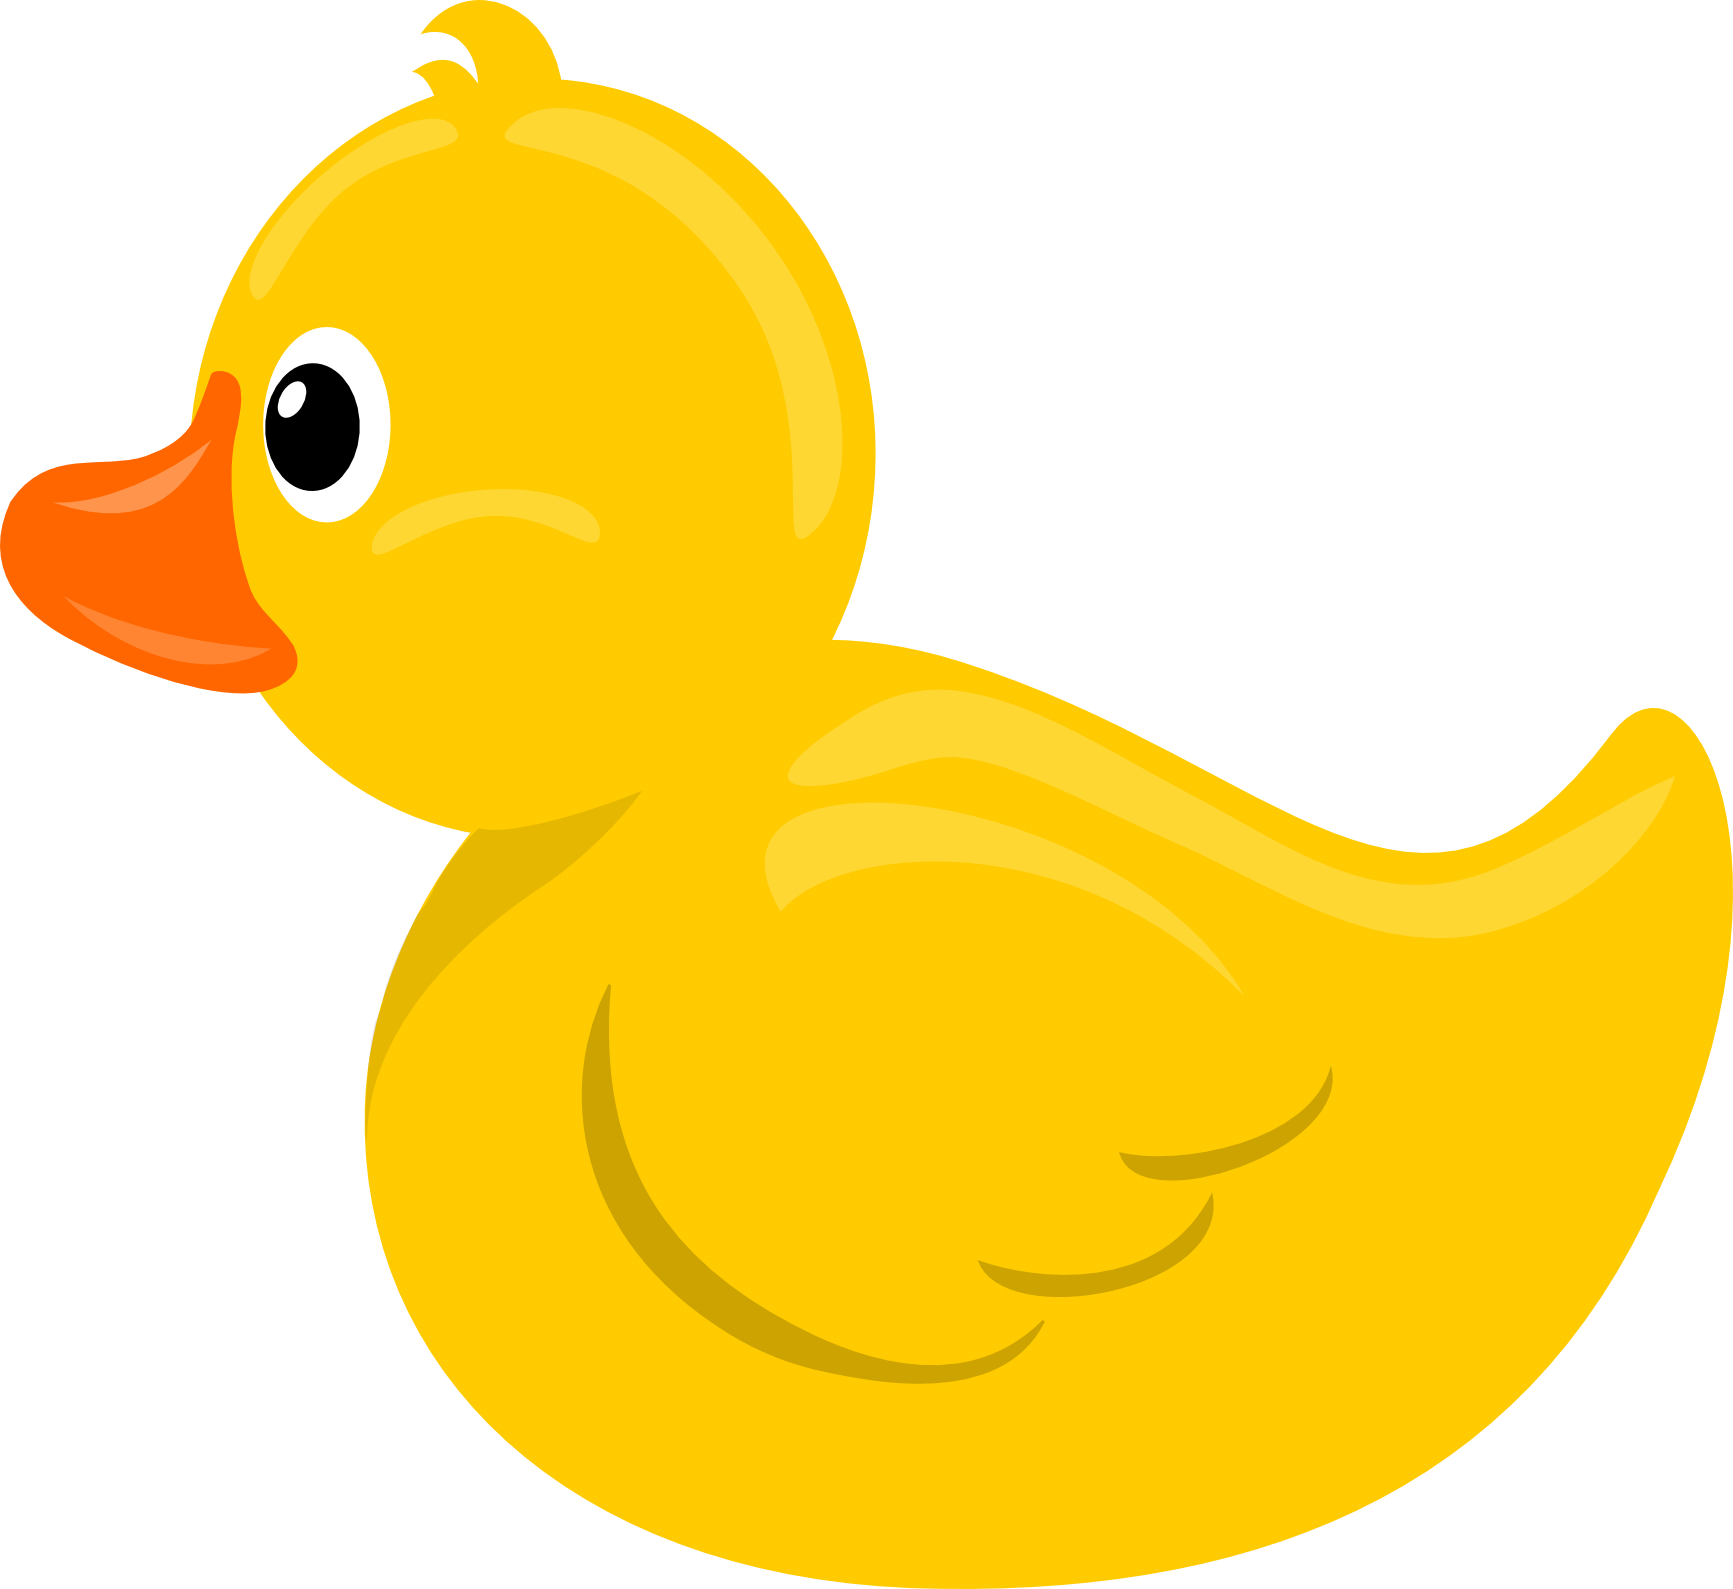 Duckling clipart baby goose. Free rubber ducky cliparts